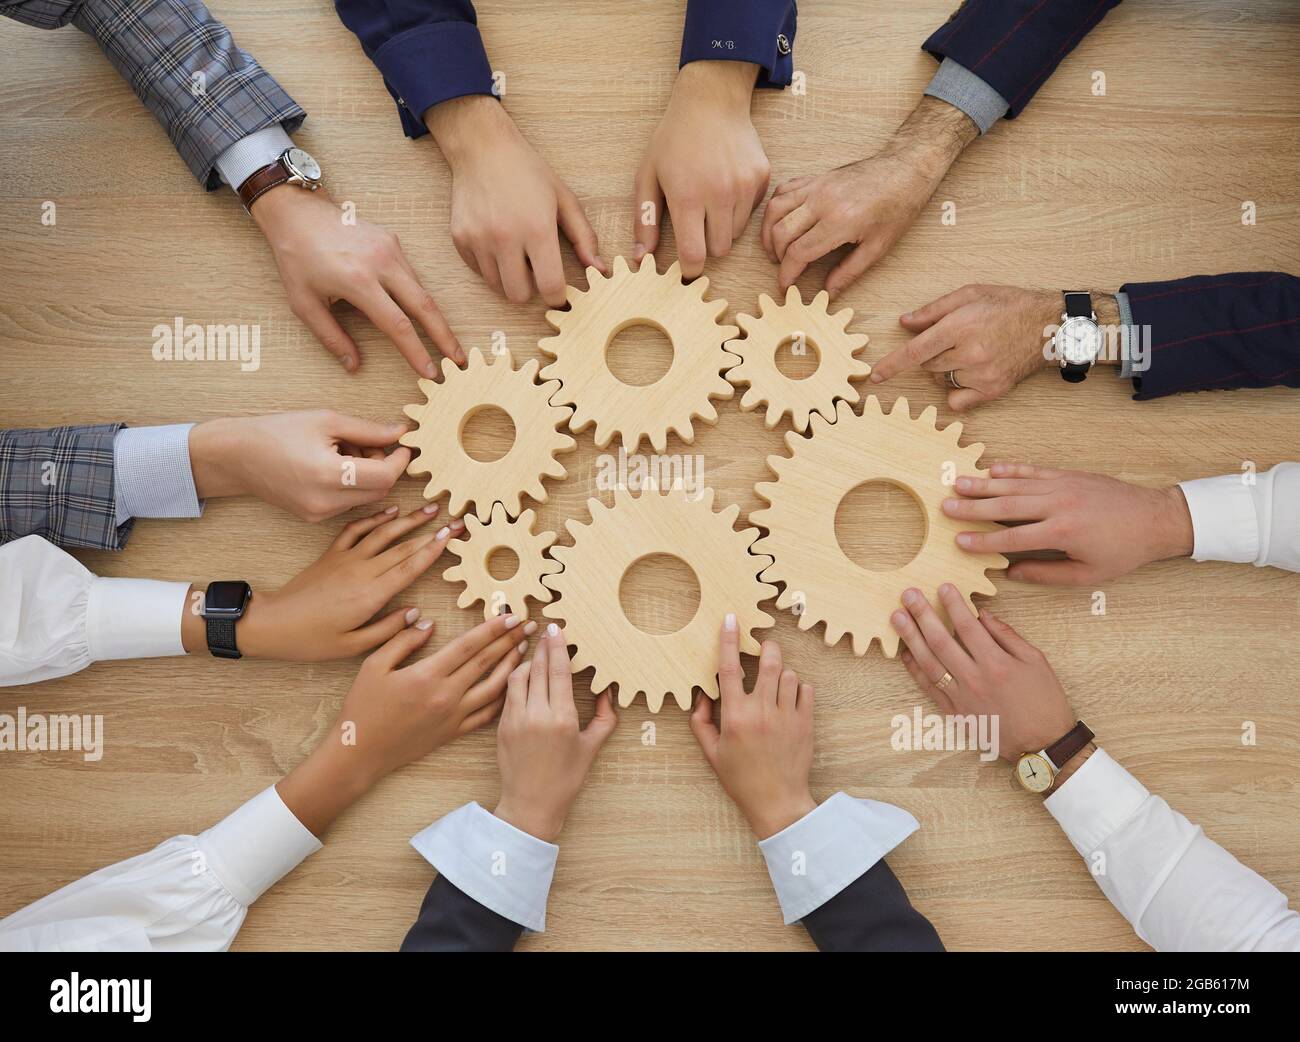 Team of people join cogwheels as metaphor for teamwork and effective business system Stock Photo